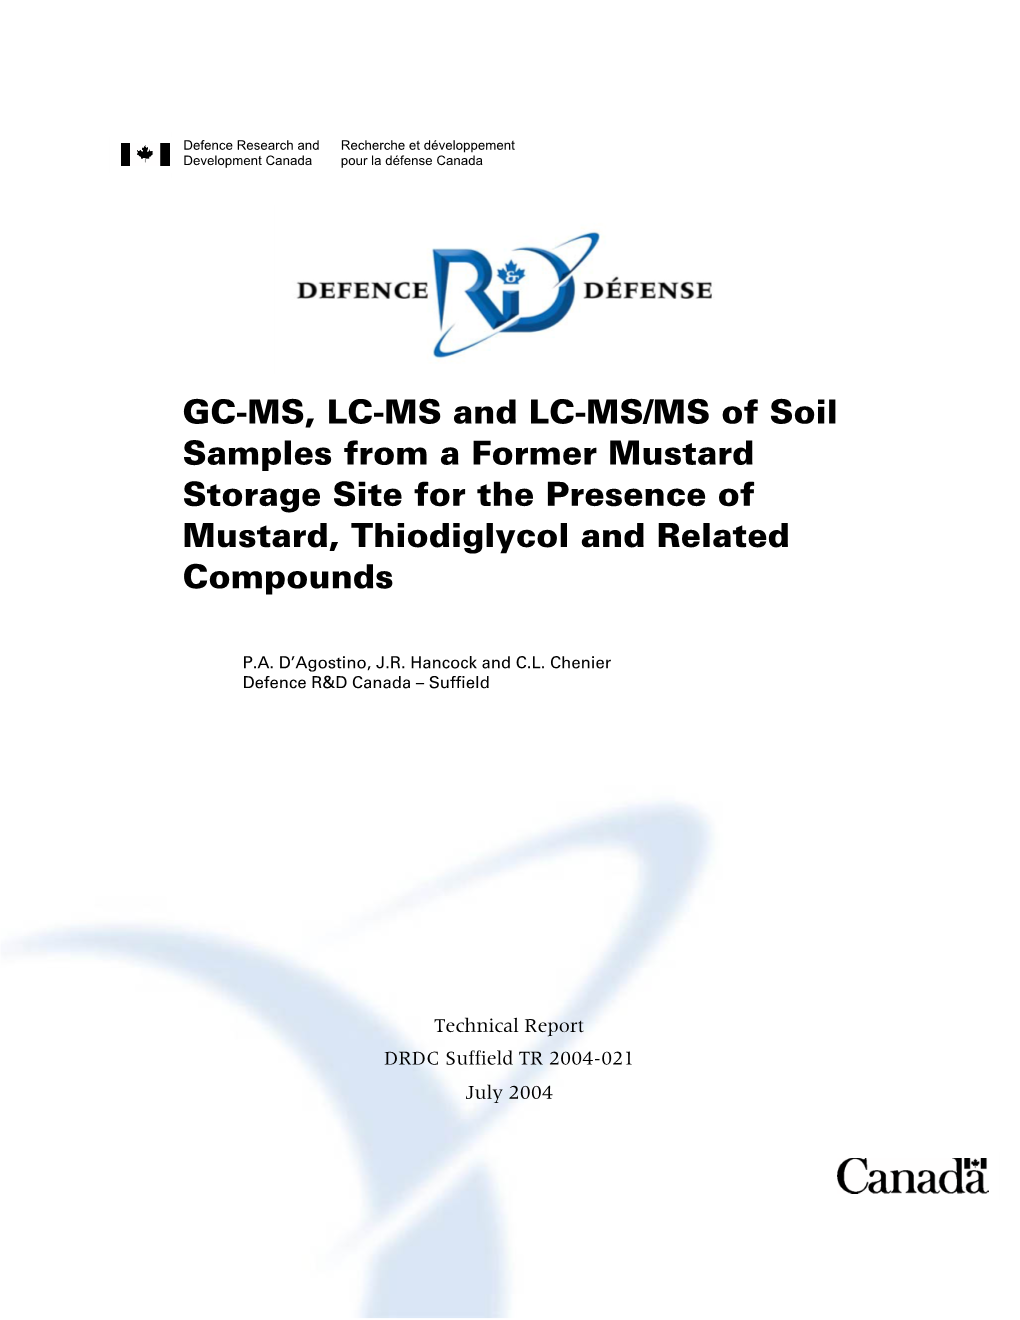 GC-MS, LC-MS and LC-MS/MS of Soil Samples from a Former Mustard Storage Site for the Presence of Mustard, Thiodiglycol and Related Compounds